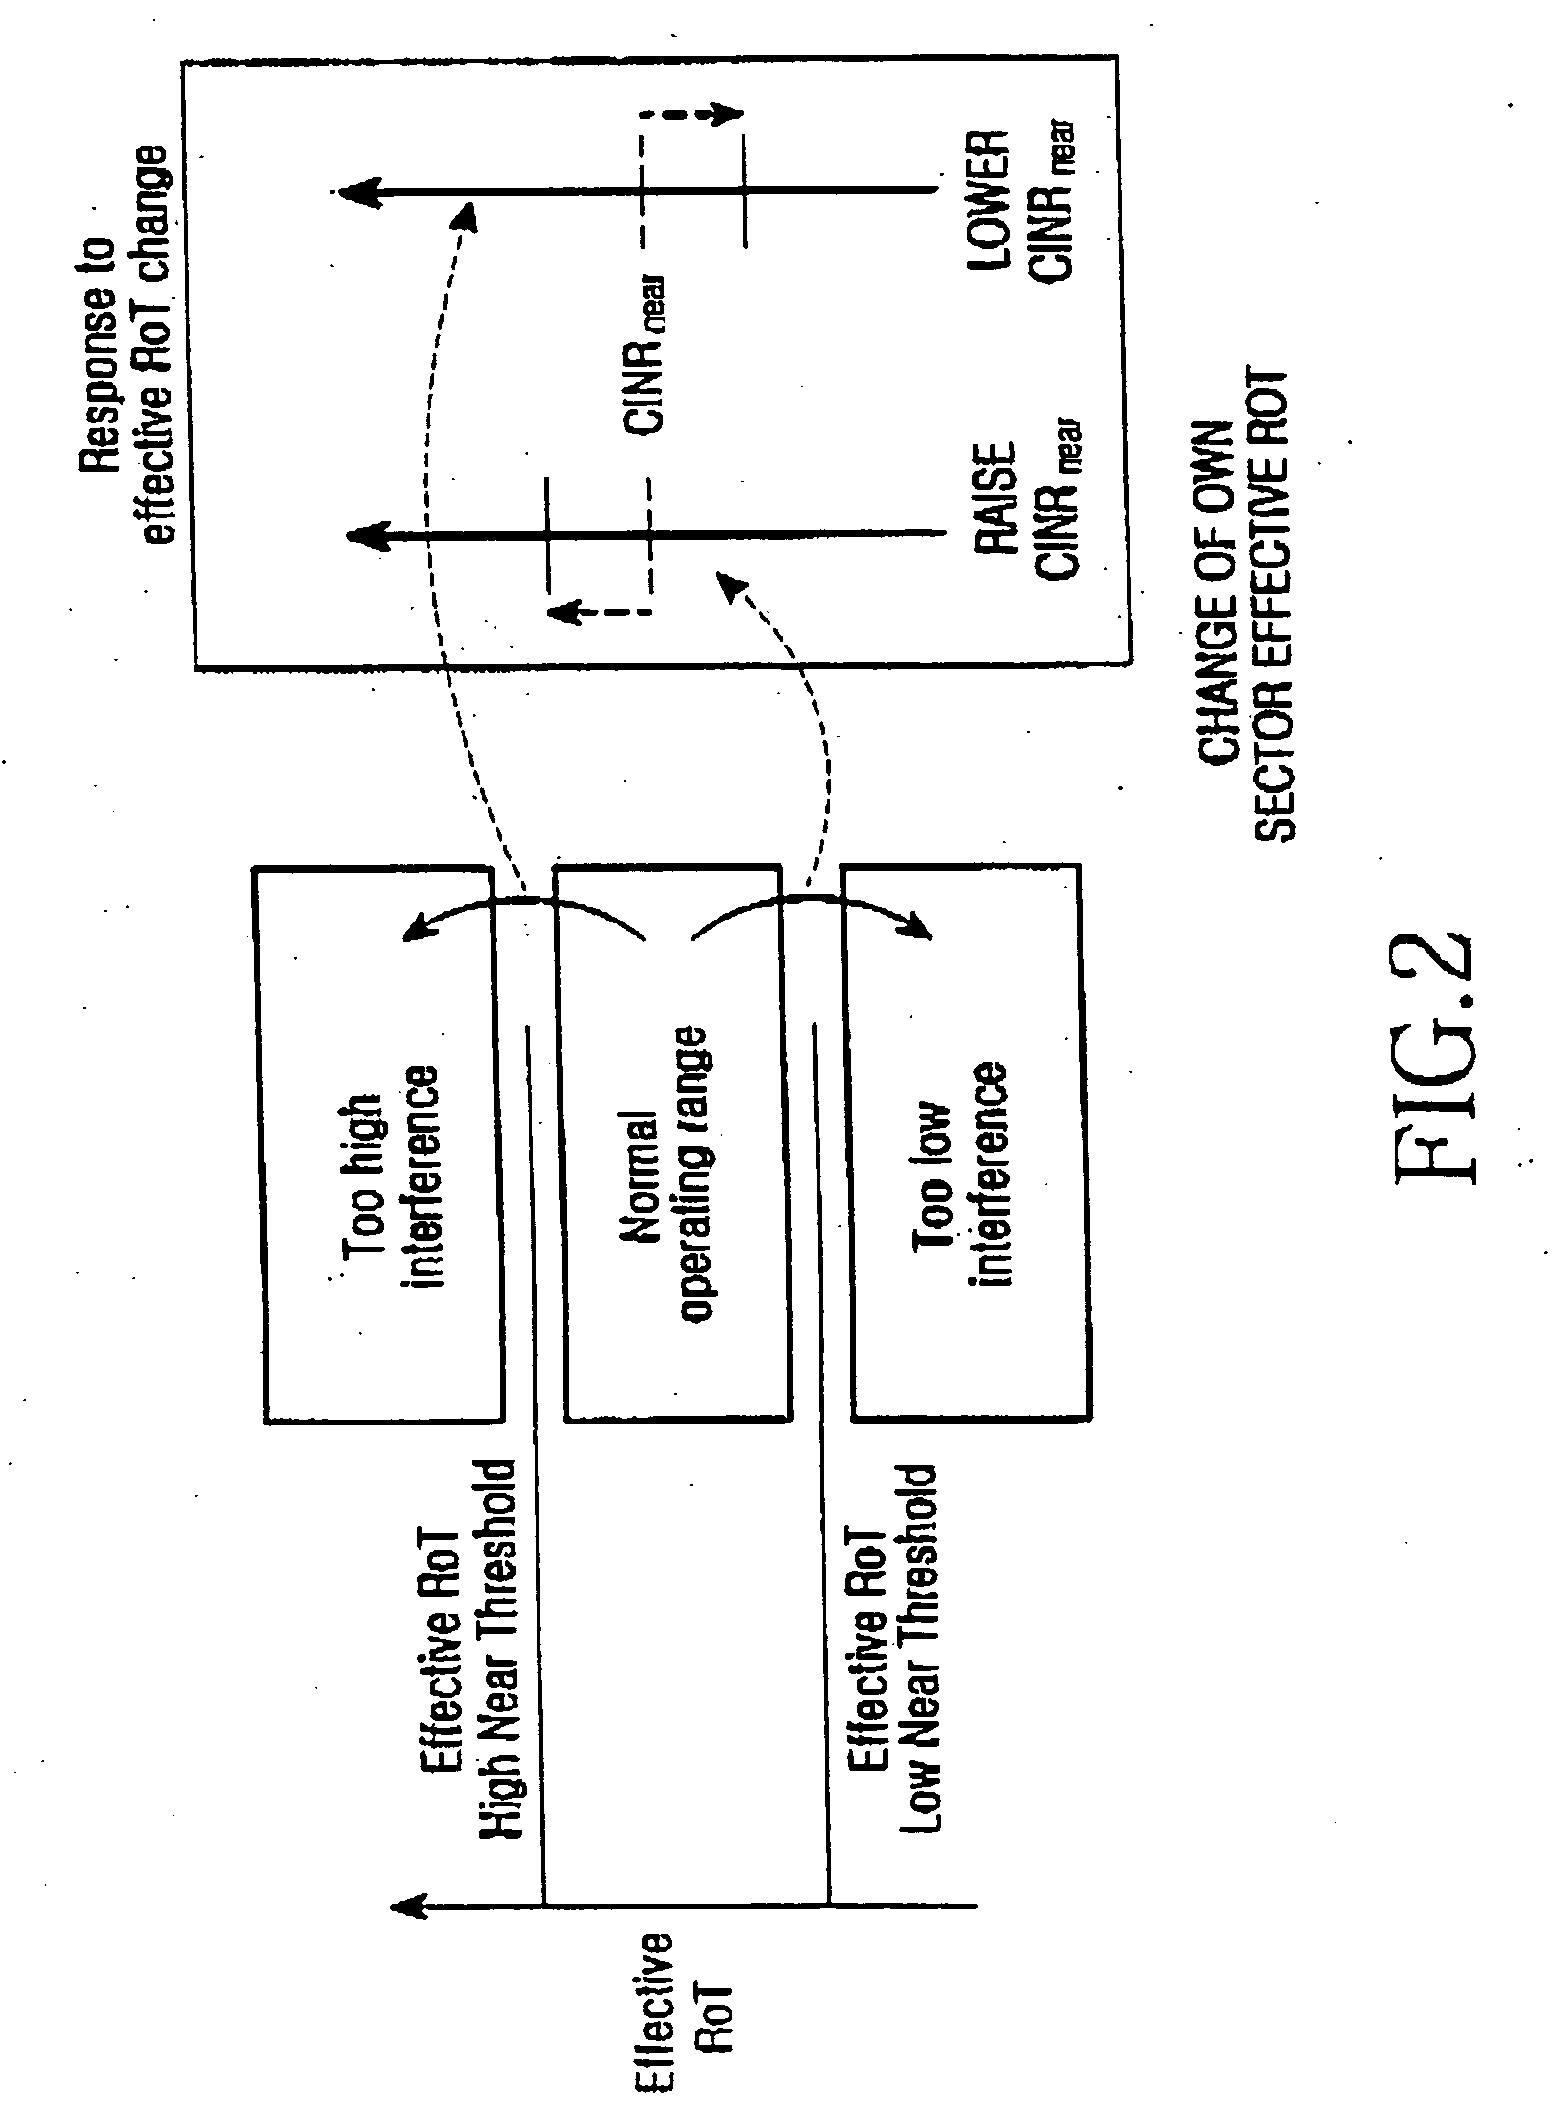 Method for controlling interference in a wireless mobile communication system